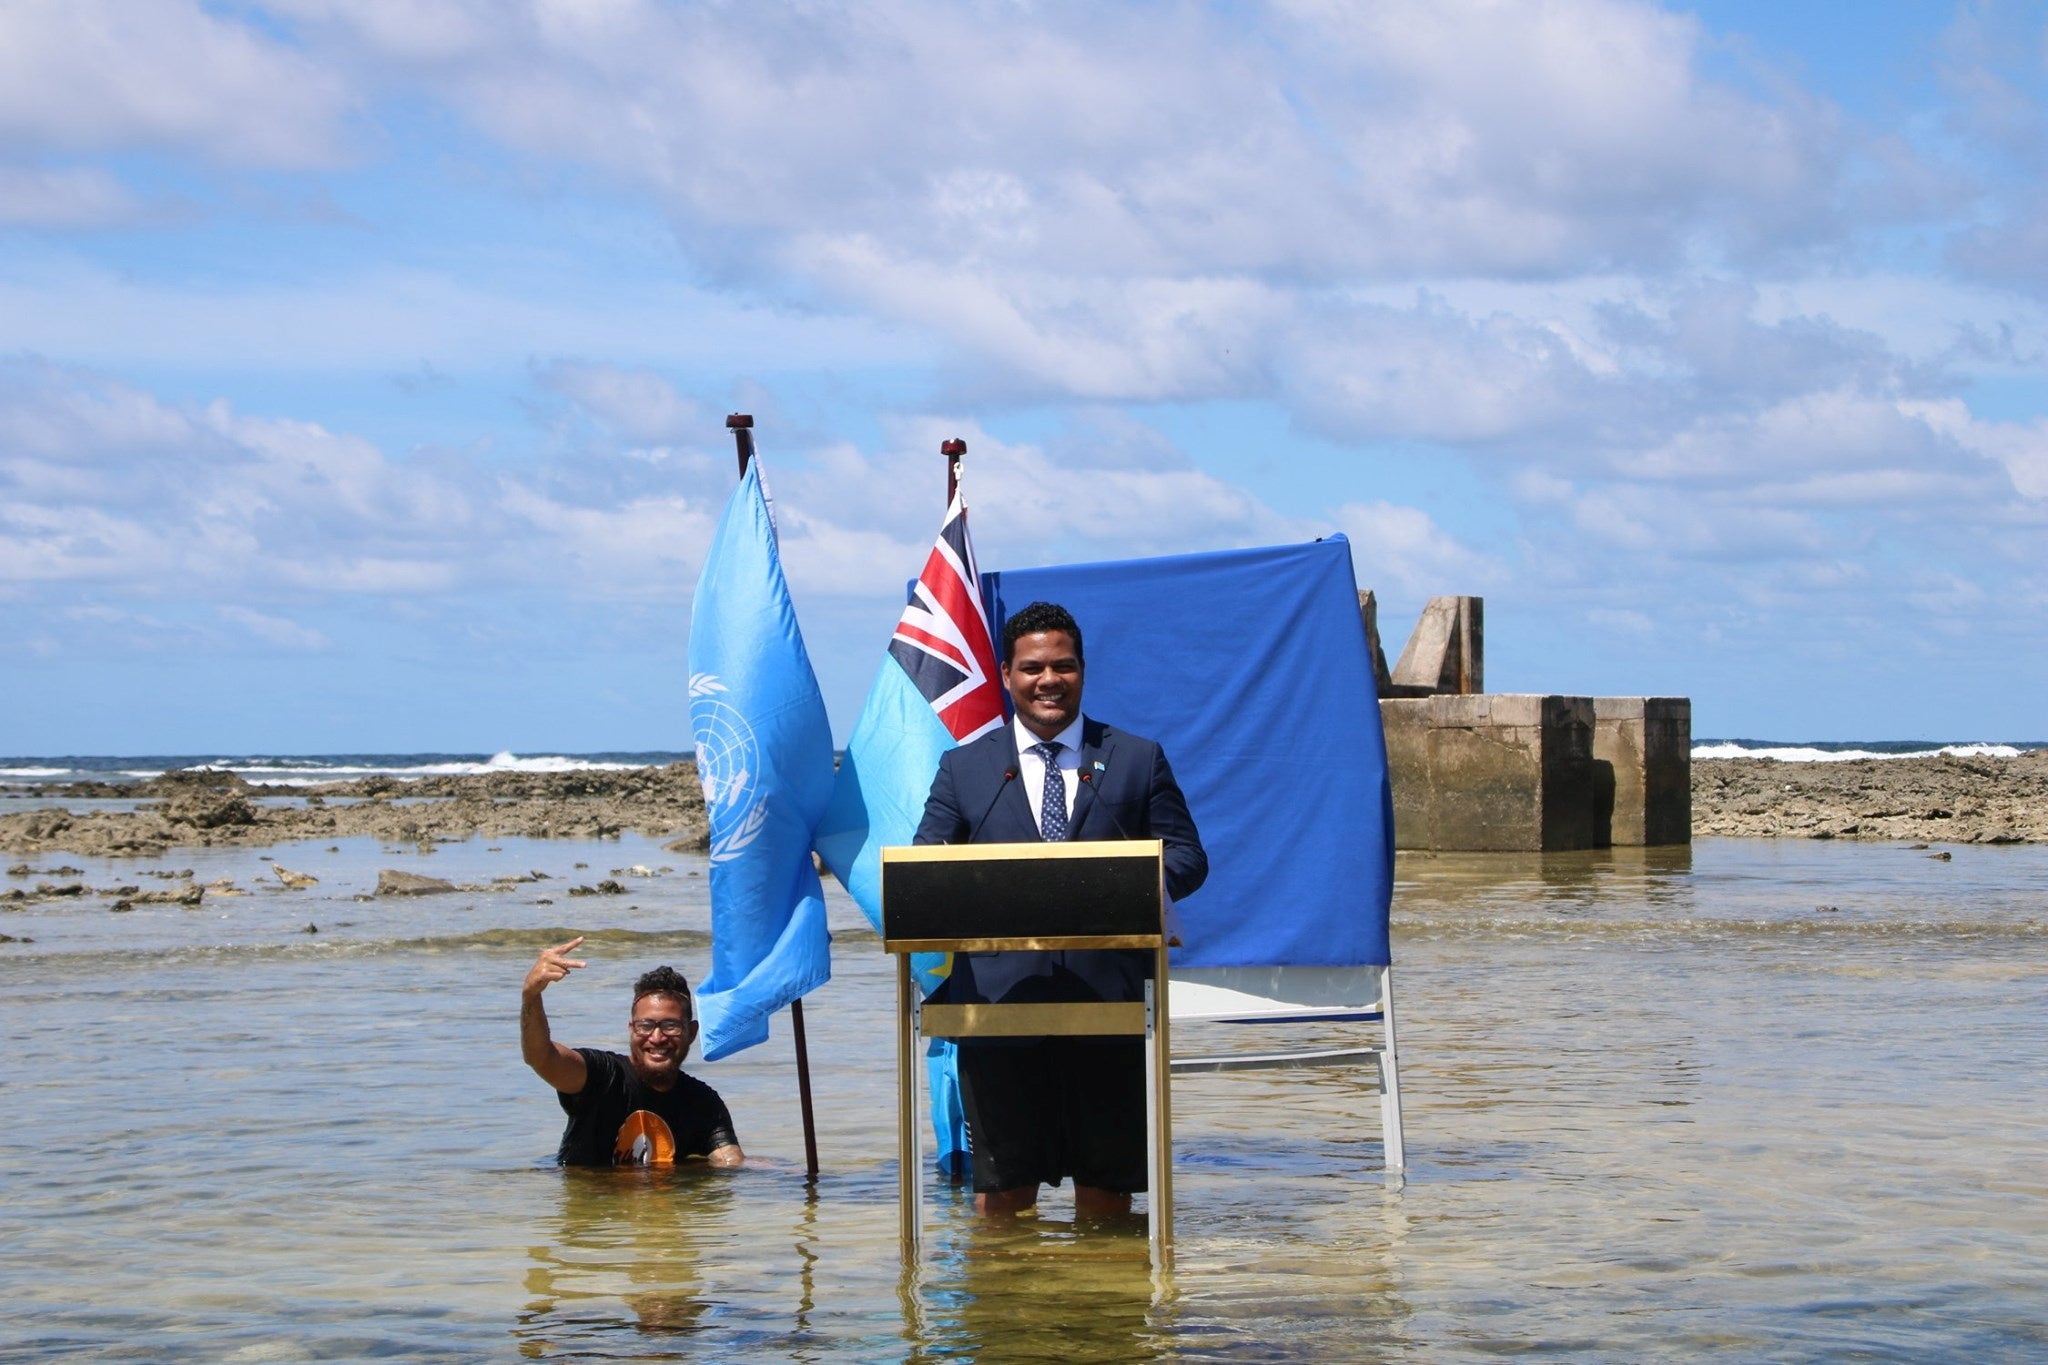 Tuvalu's Minister for Justice, Communication & Foreign Affairs Simon Kofe gives a COP26 statement while standing in the ocean